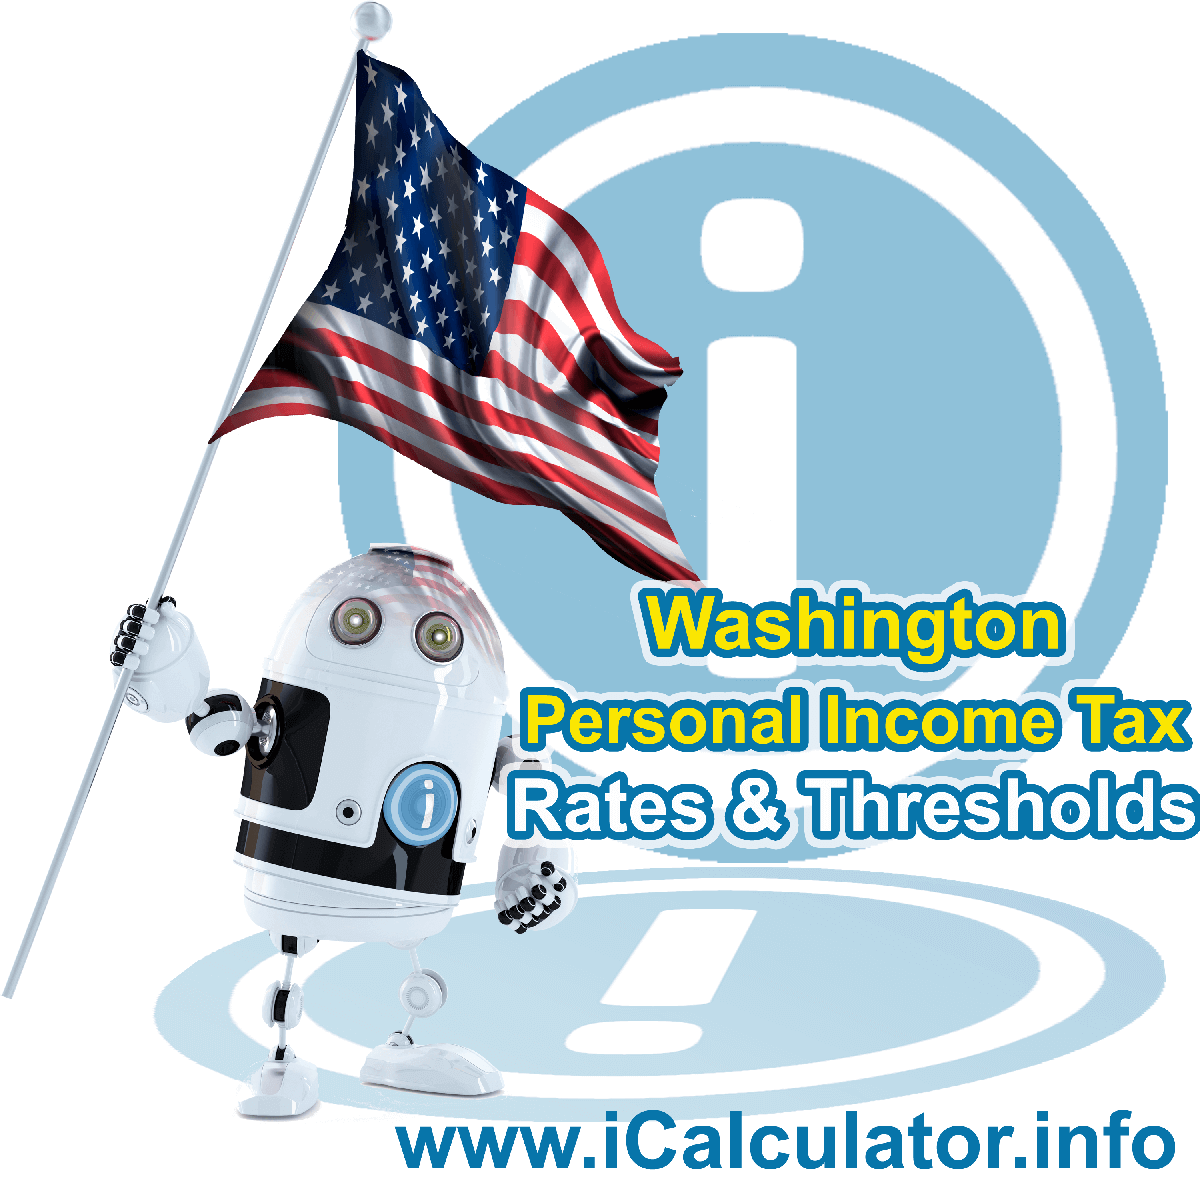 Washington State Tax Tables 2019. This image displays details of the Washington State Tax Tables for the 2019 tax return year which is provided in support of the 2019 US Tax Calculator